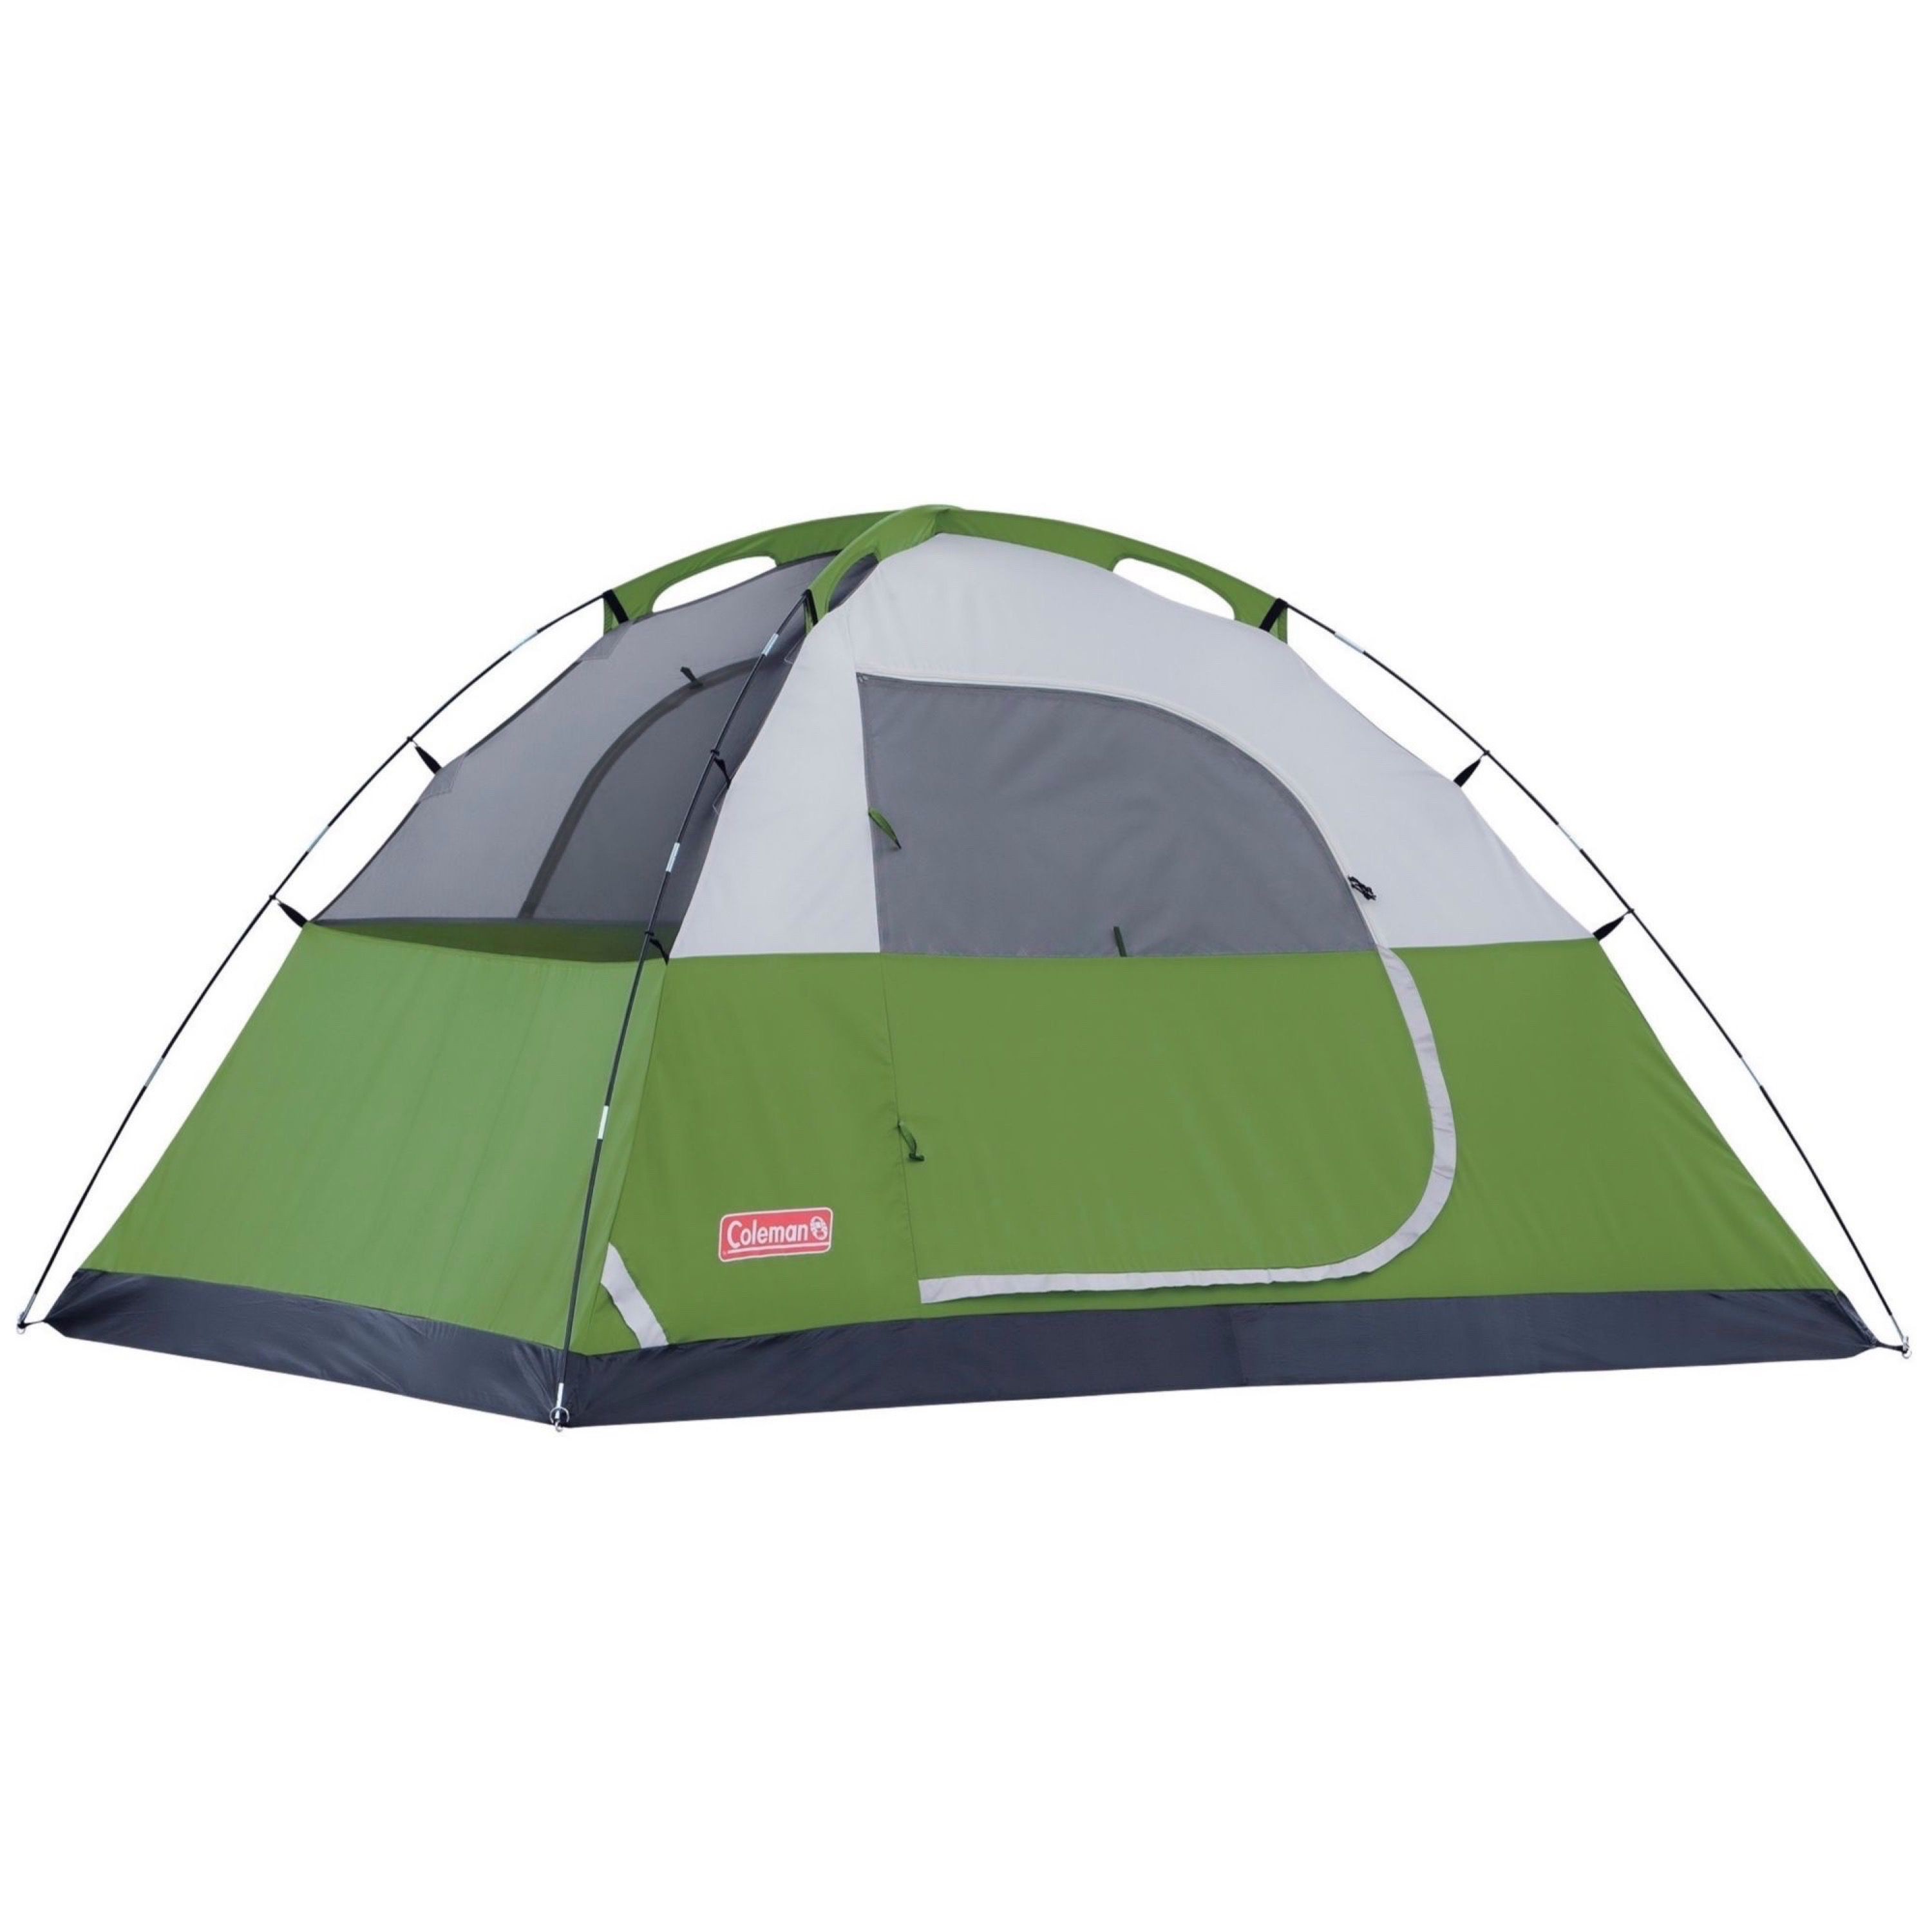 Coleman 3-Person Dome Tent - image 2 of 7